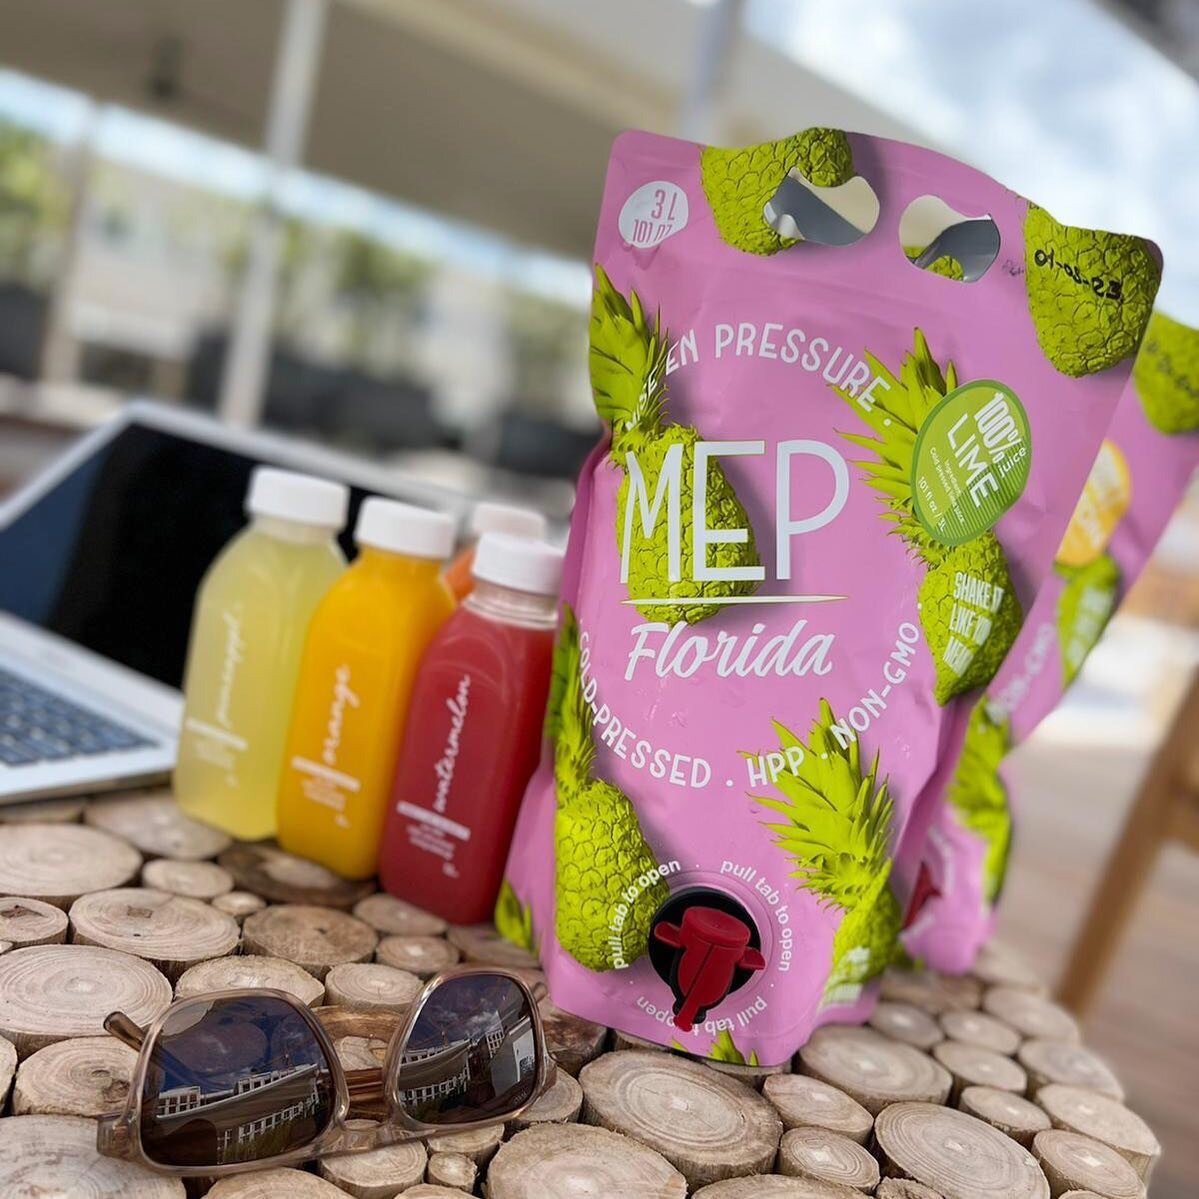 Are you really prepped for the weekend? 🍹We got you! #coldpressedjuices for all your weekend creations! #cocktails 
&bull;
&bull;

&bull;
&bull;
#coldpressedjuice #coldpressed #hospitality #miamiresort #miamirestaurants #miamispa #miamilife #miamibu